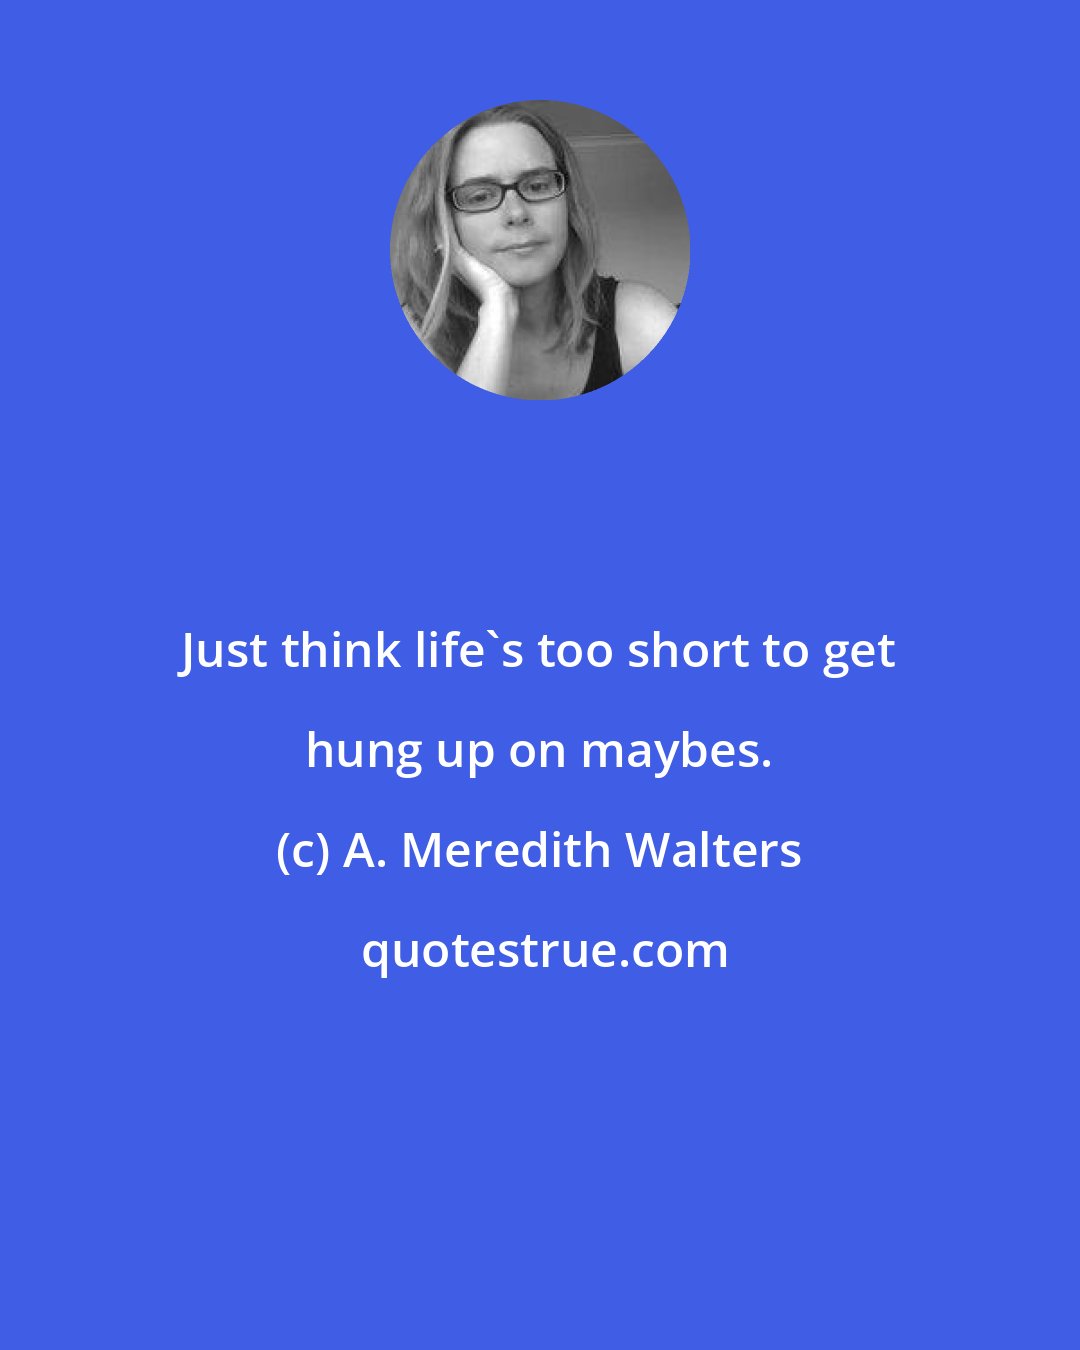 A. Meredith Walters: Just think life's too short to get hung up on maybes.